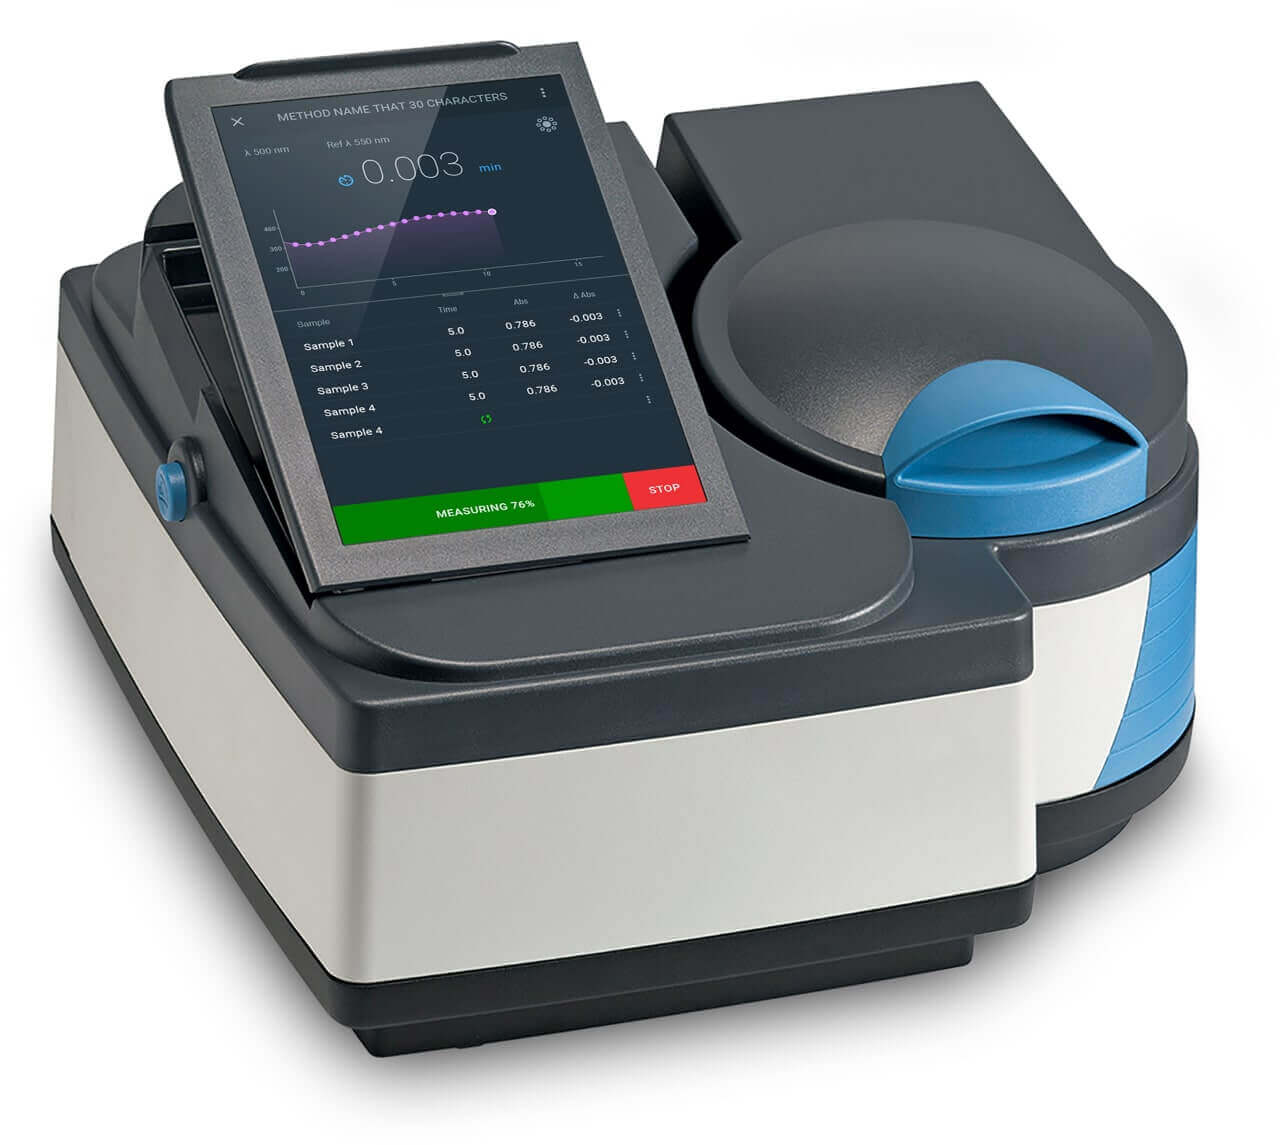 Spectrophotometer with redesigned embedded touchscreen